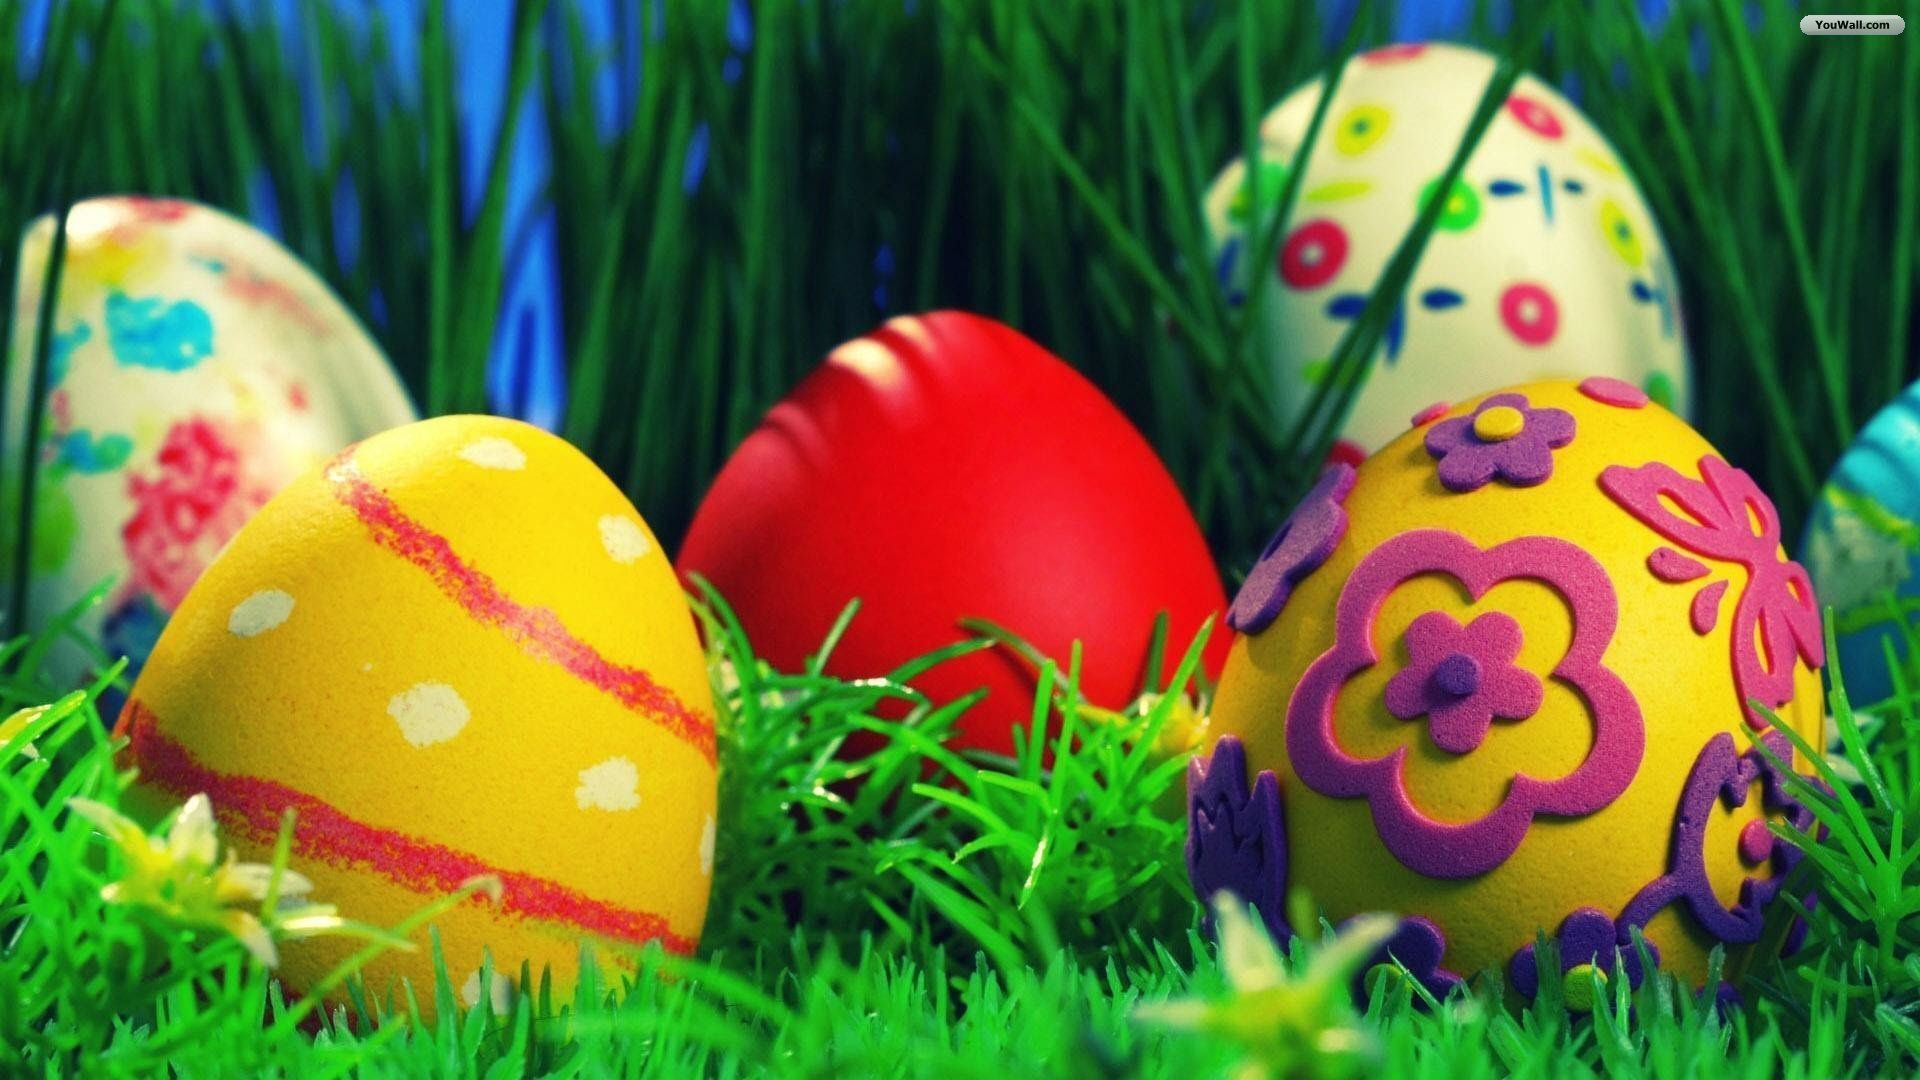 YouWall - Colorful Easter Eggs Wallpaper - wallpaper,wallpapers ...